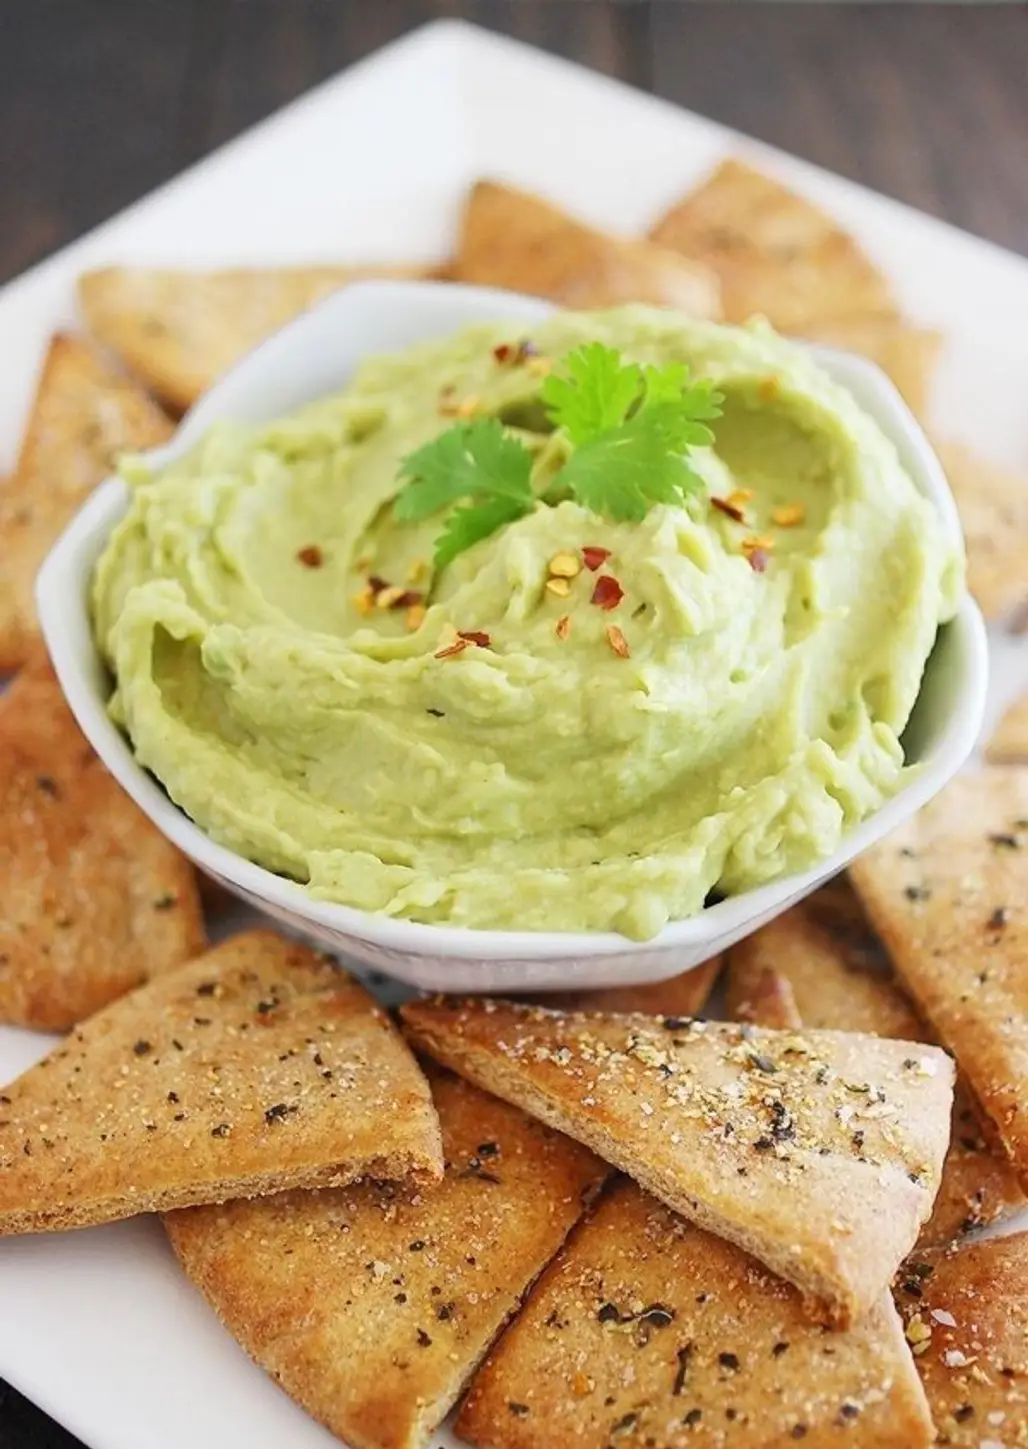 Avocado on Wheat Crackers Makes a Healthy Snack